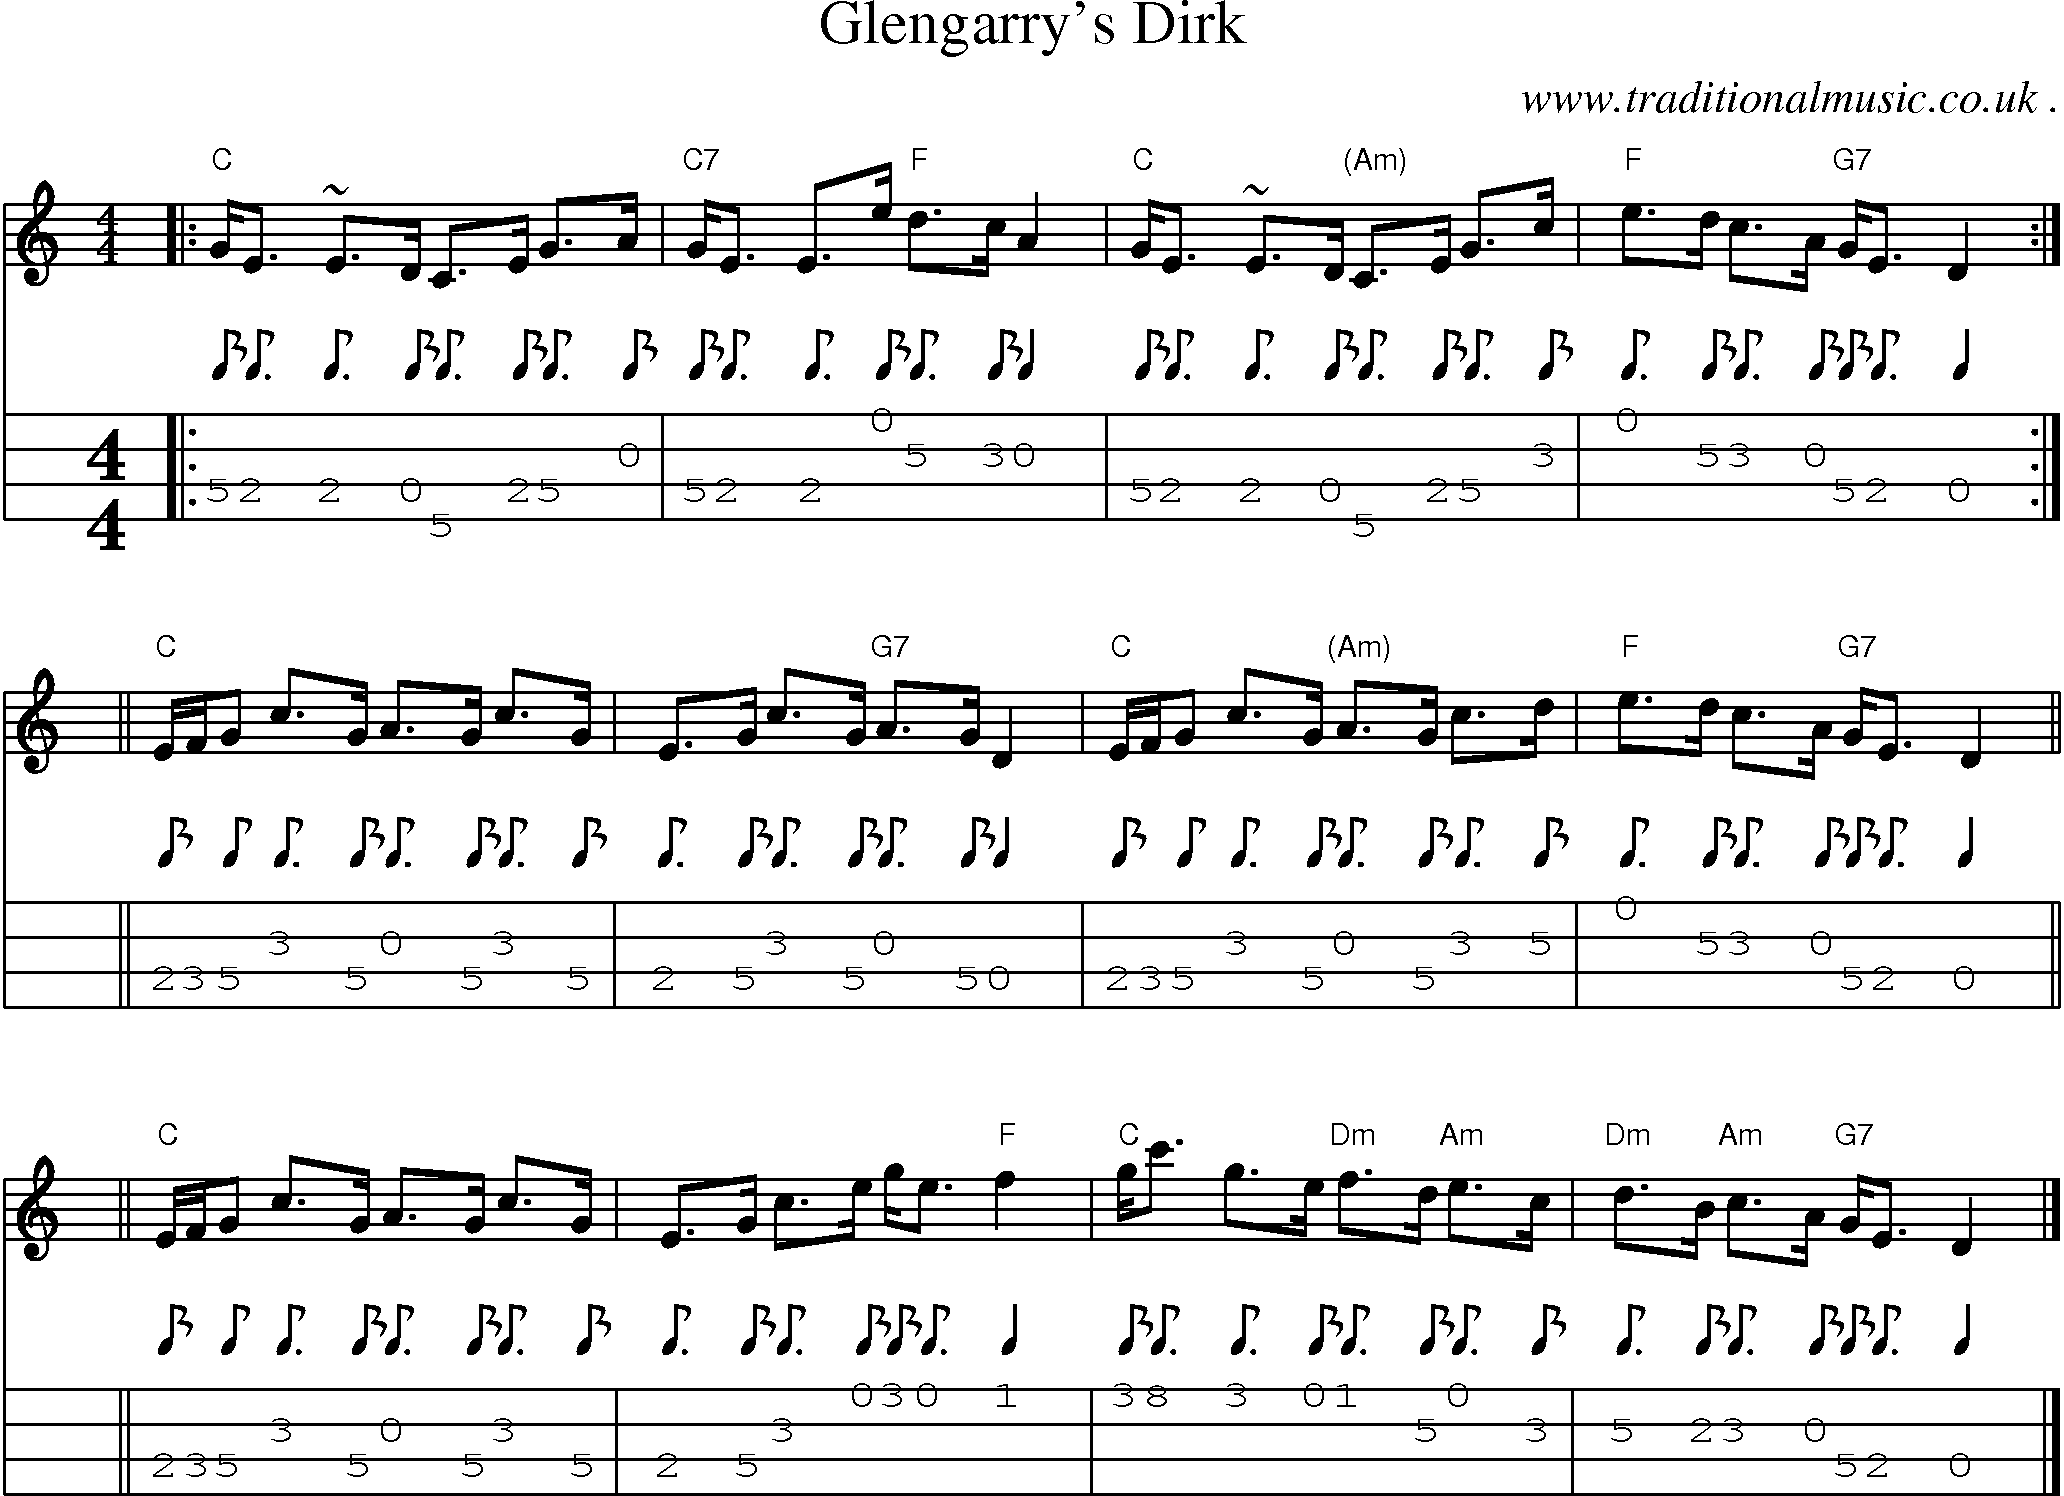 Sheet-music  score, Chords and Mandolin Tabs for Glengarrys Dirk